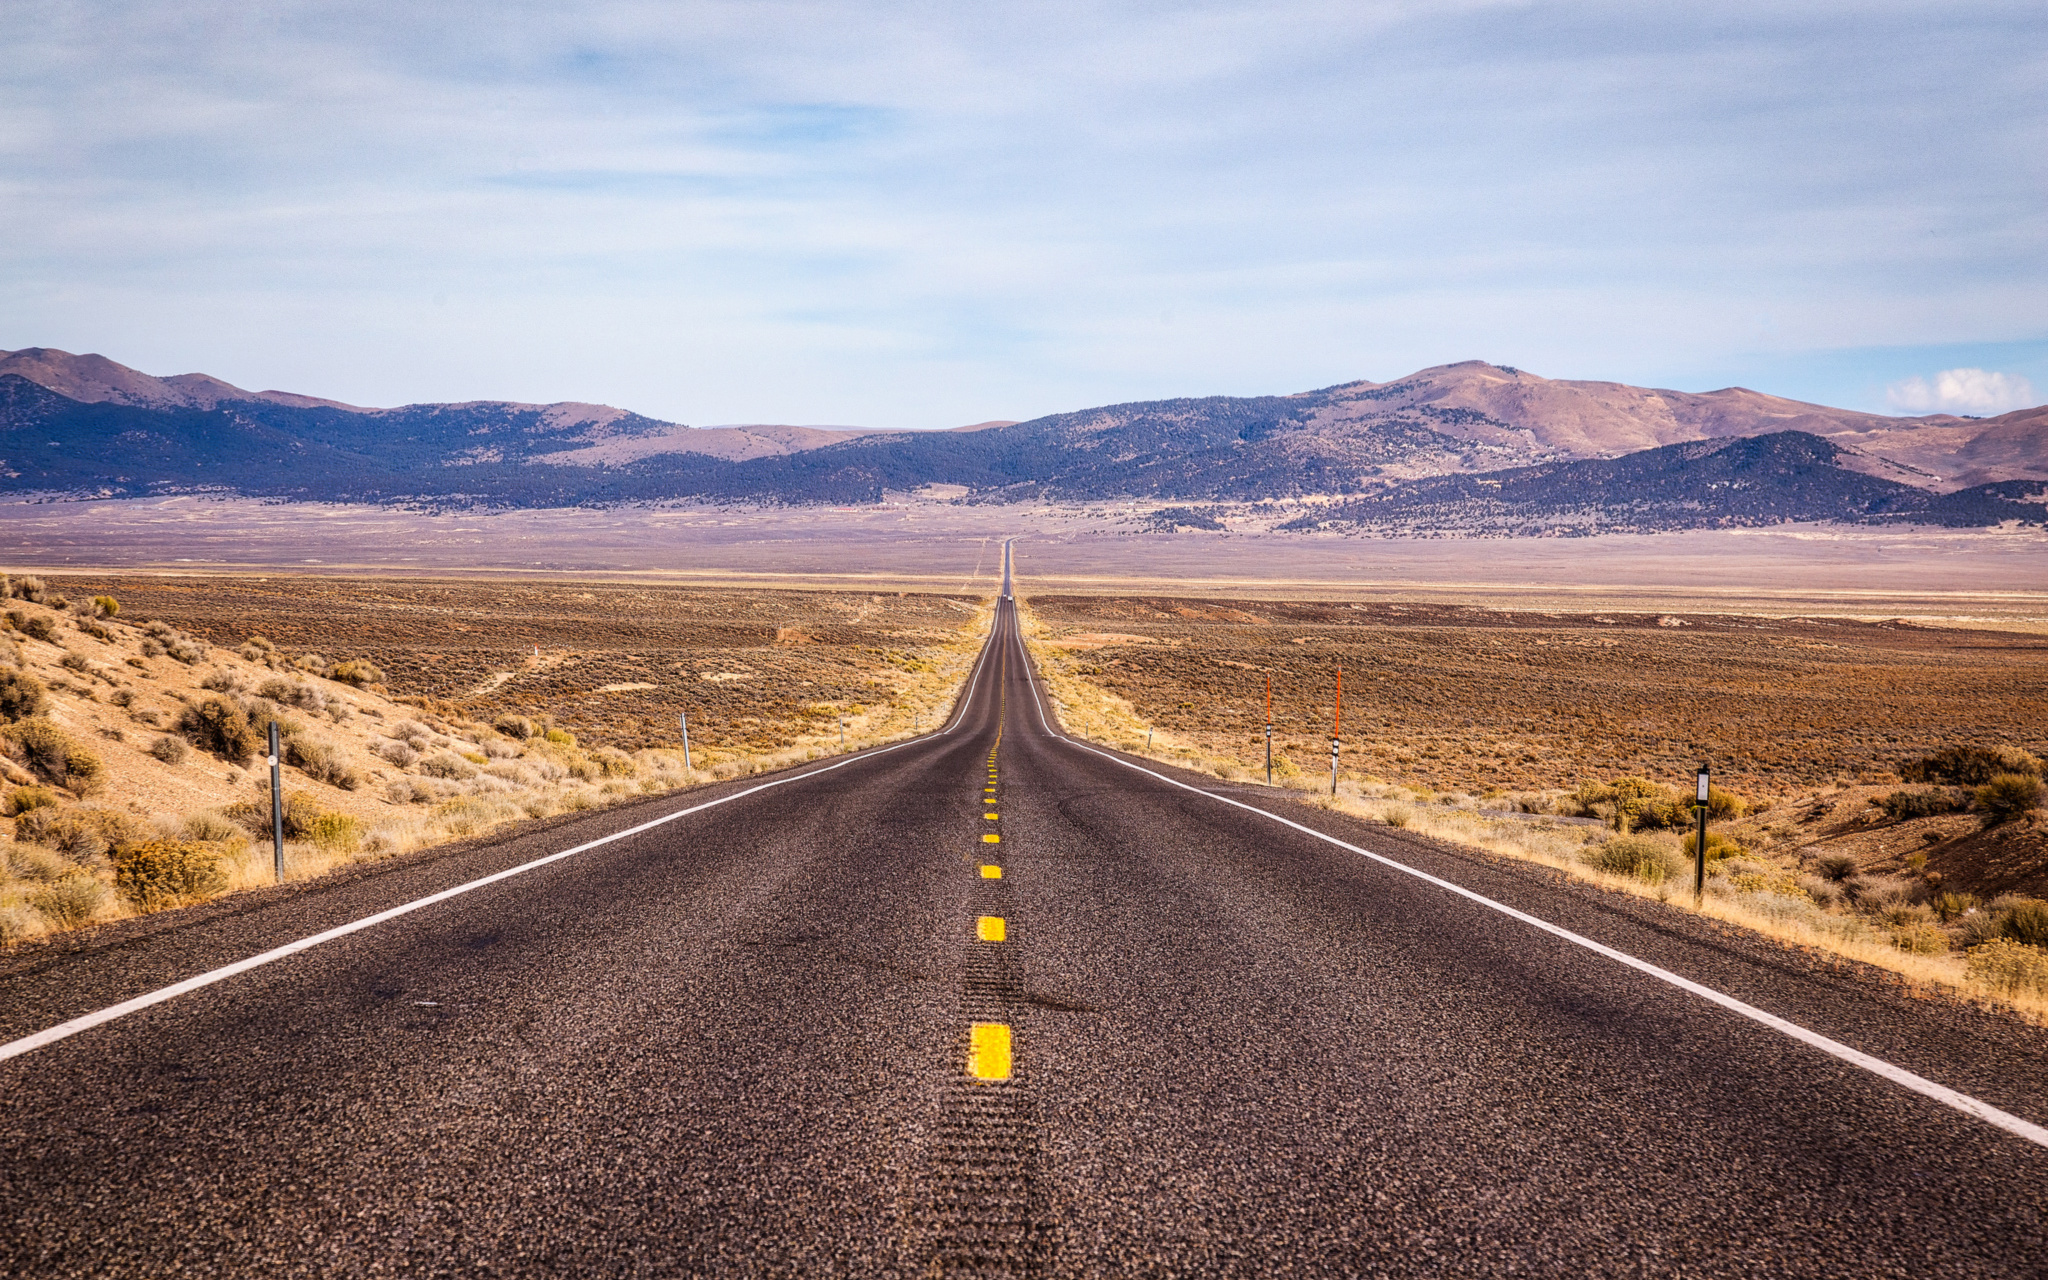 Image: "U.S. Route 50 Nevada The Loneliest Road" by Mobilus In Mobili is licensed under CC BY-SA 2.0